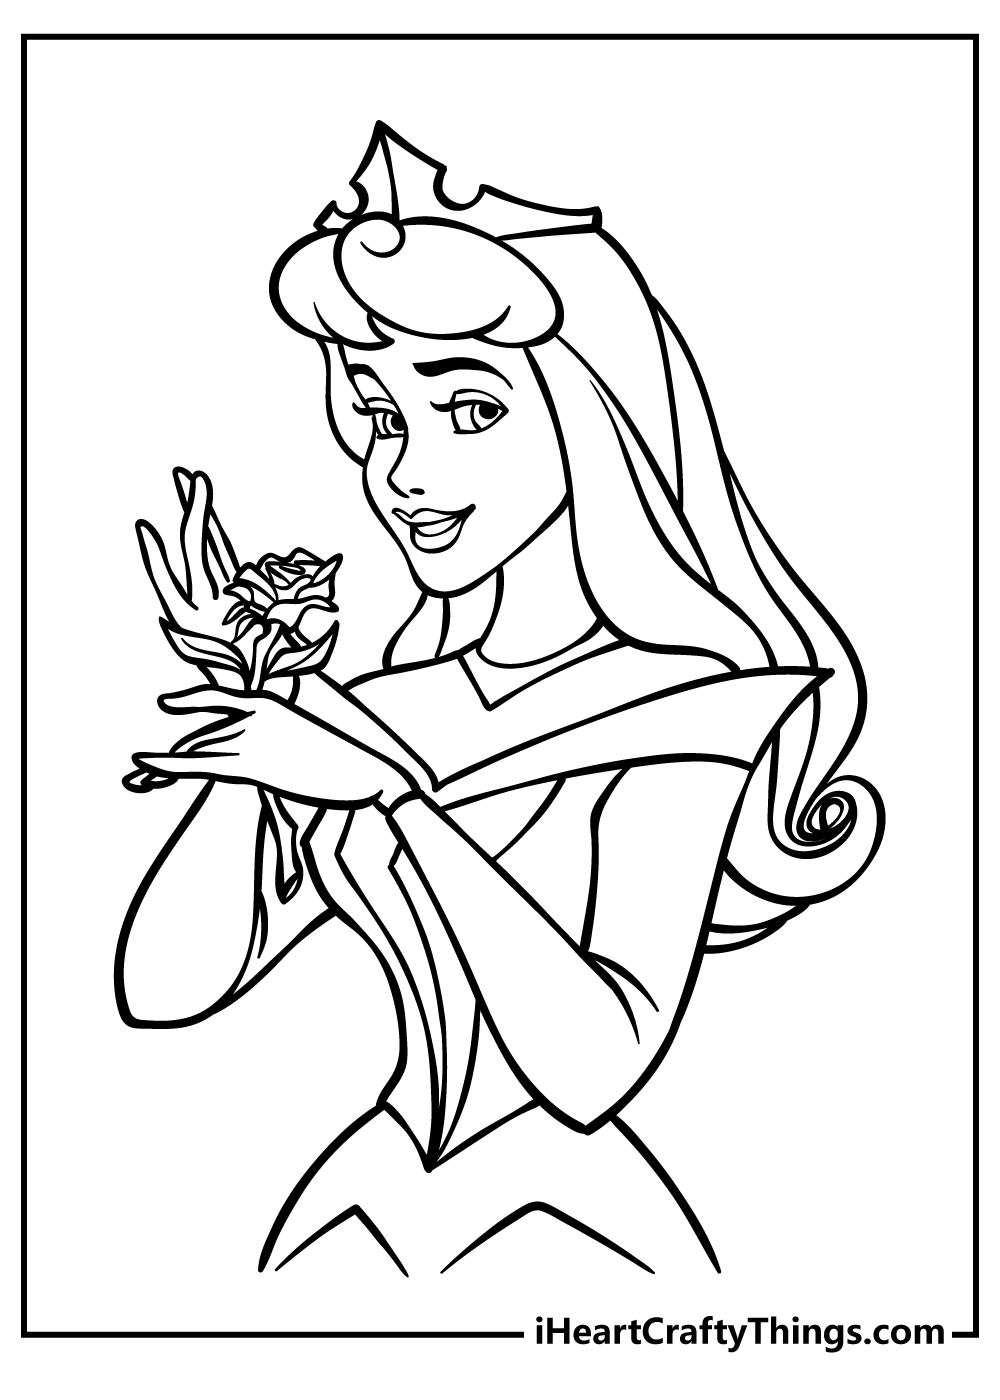 Printable Sleeping Beauty Coloring Pages Updated 20 Hol dir